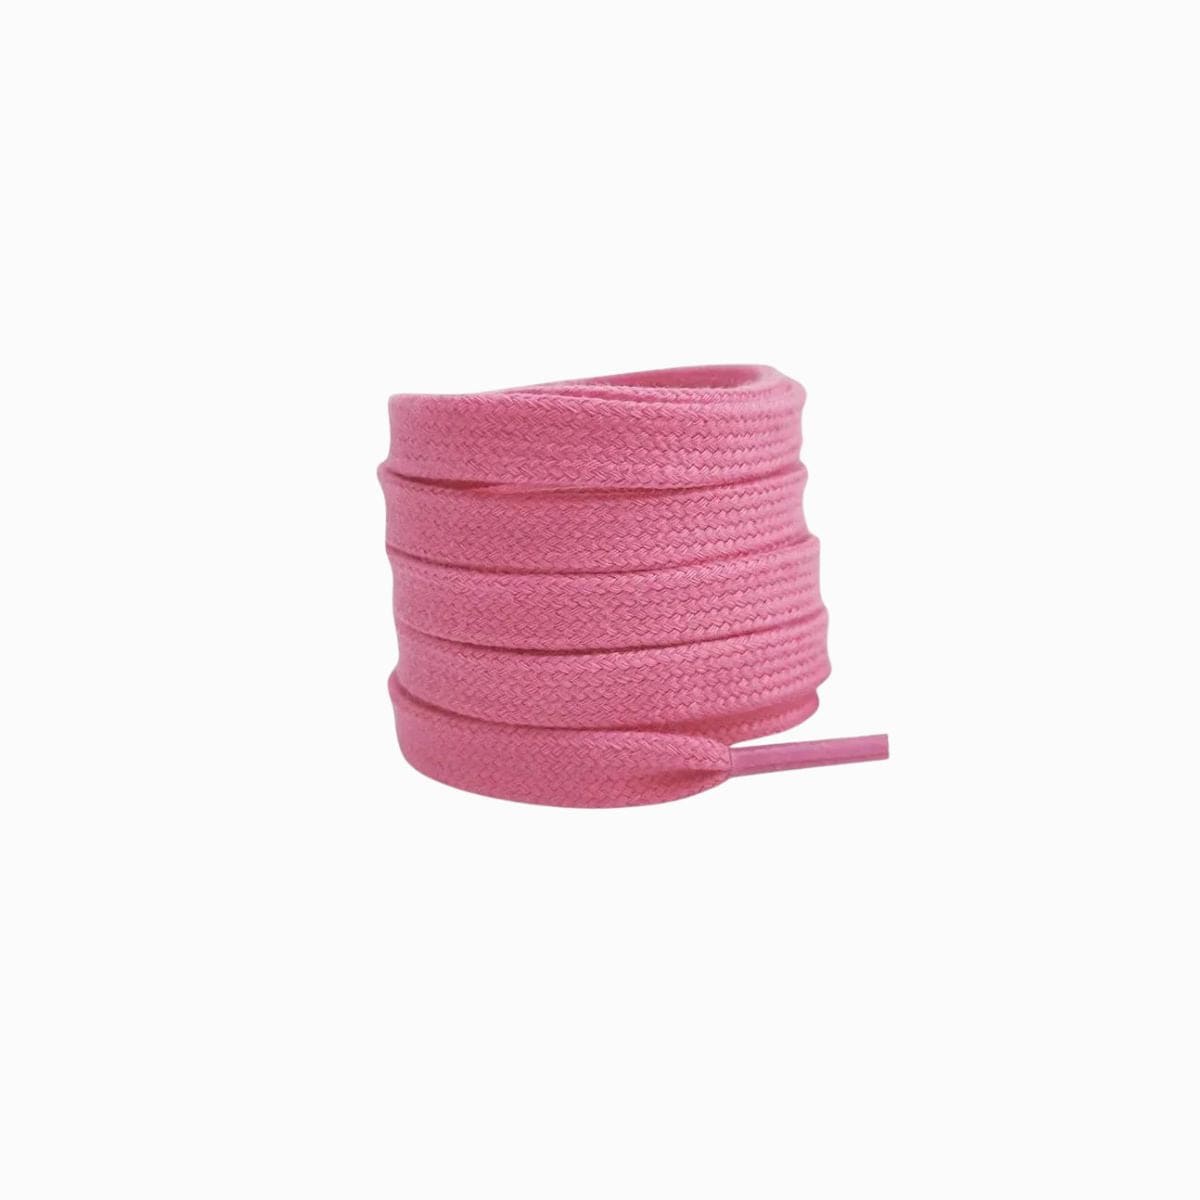 Blush Replacement Adidas Shoe Laces for Adidas Gazelle Sneakers by Kicks Shoelaces